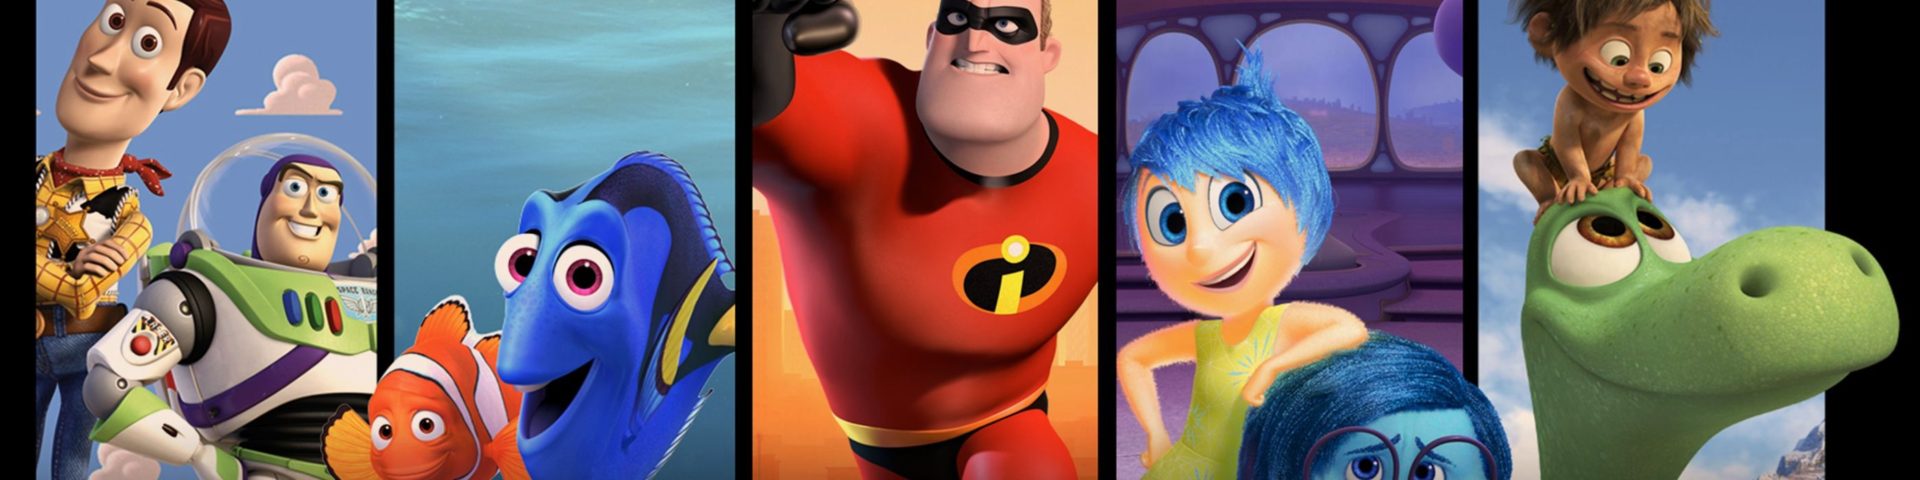 15 Questions That Only True Pixar Fans Can Guess Right Answers To